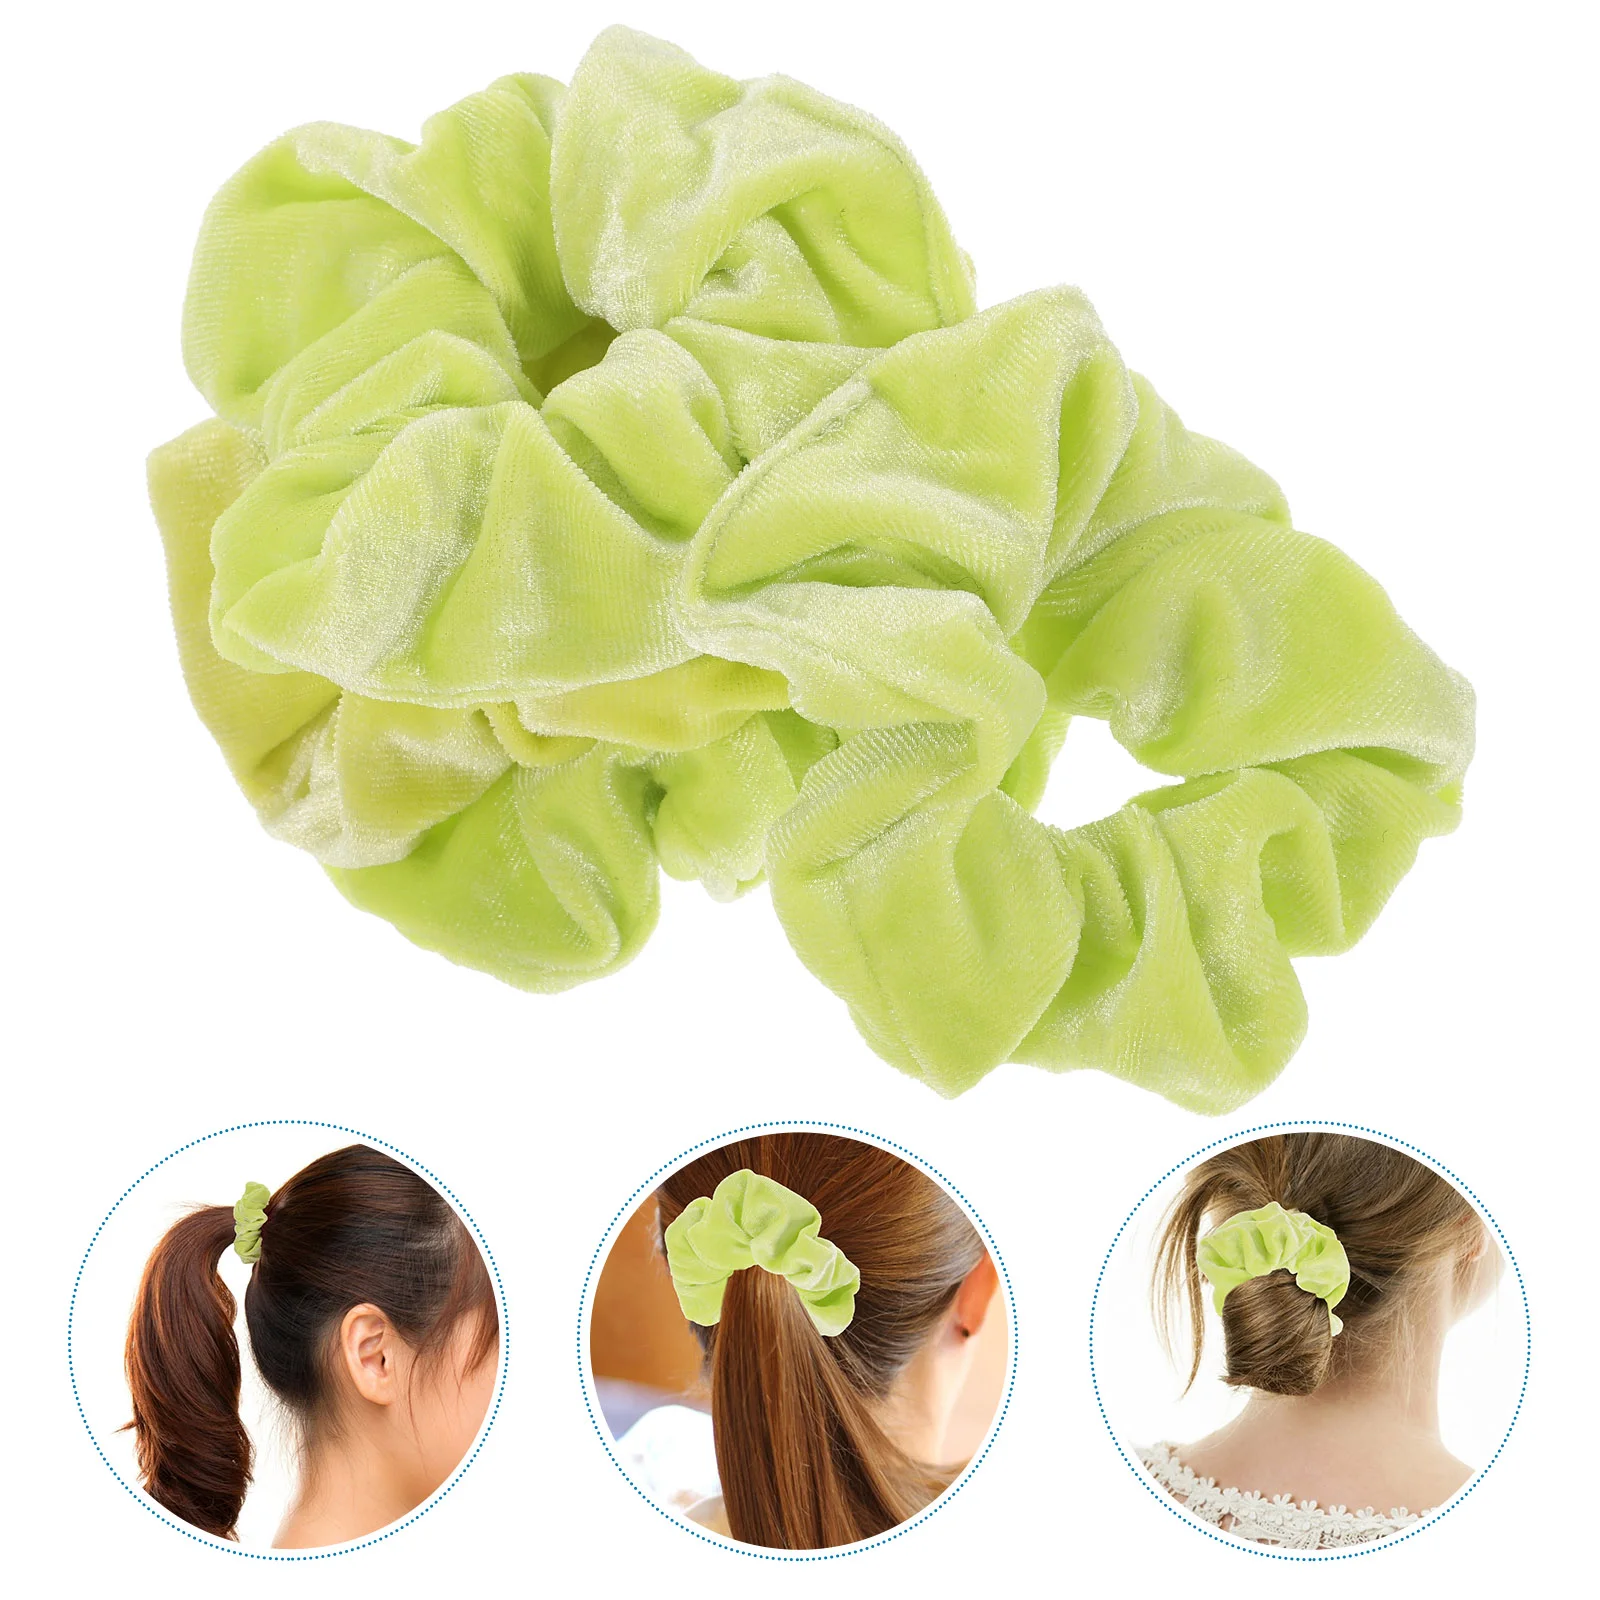 

4 Pcs Hair Bands Large Intestine Girls Tie Ties Ponytail Decorative Scrunchies Women's Stretchy